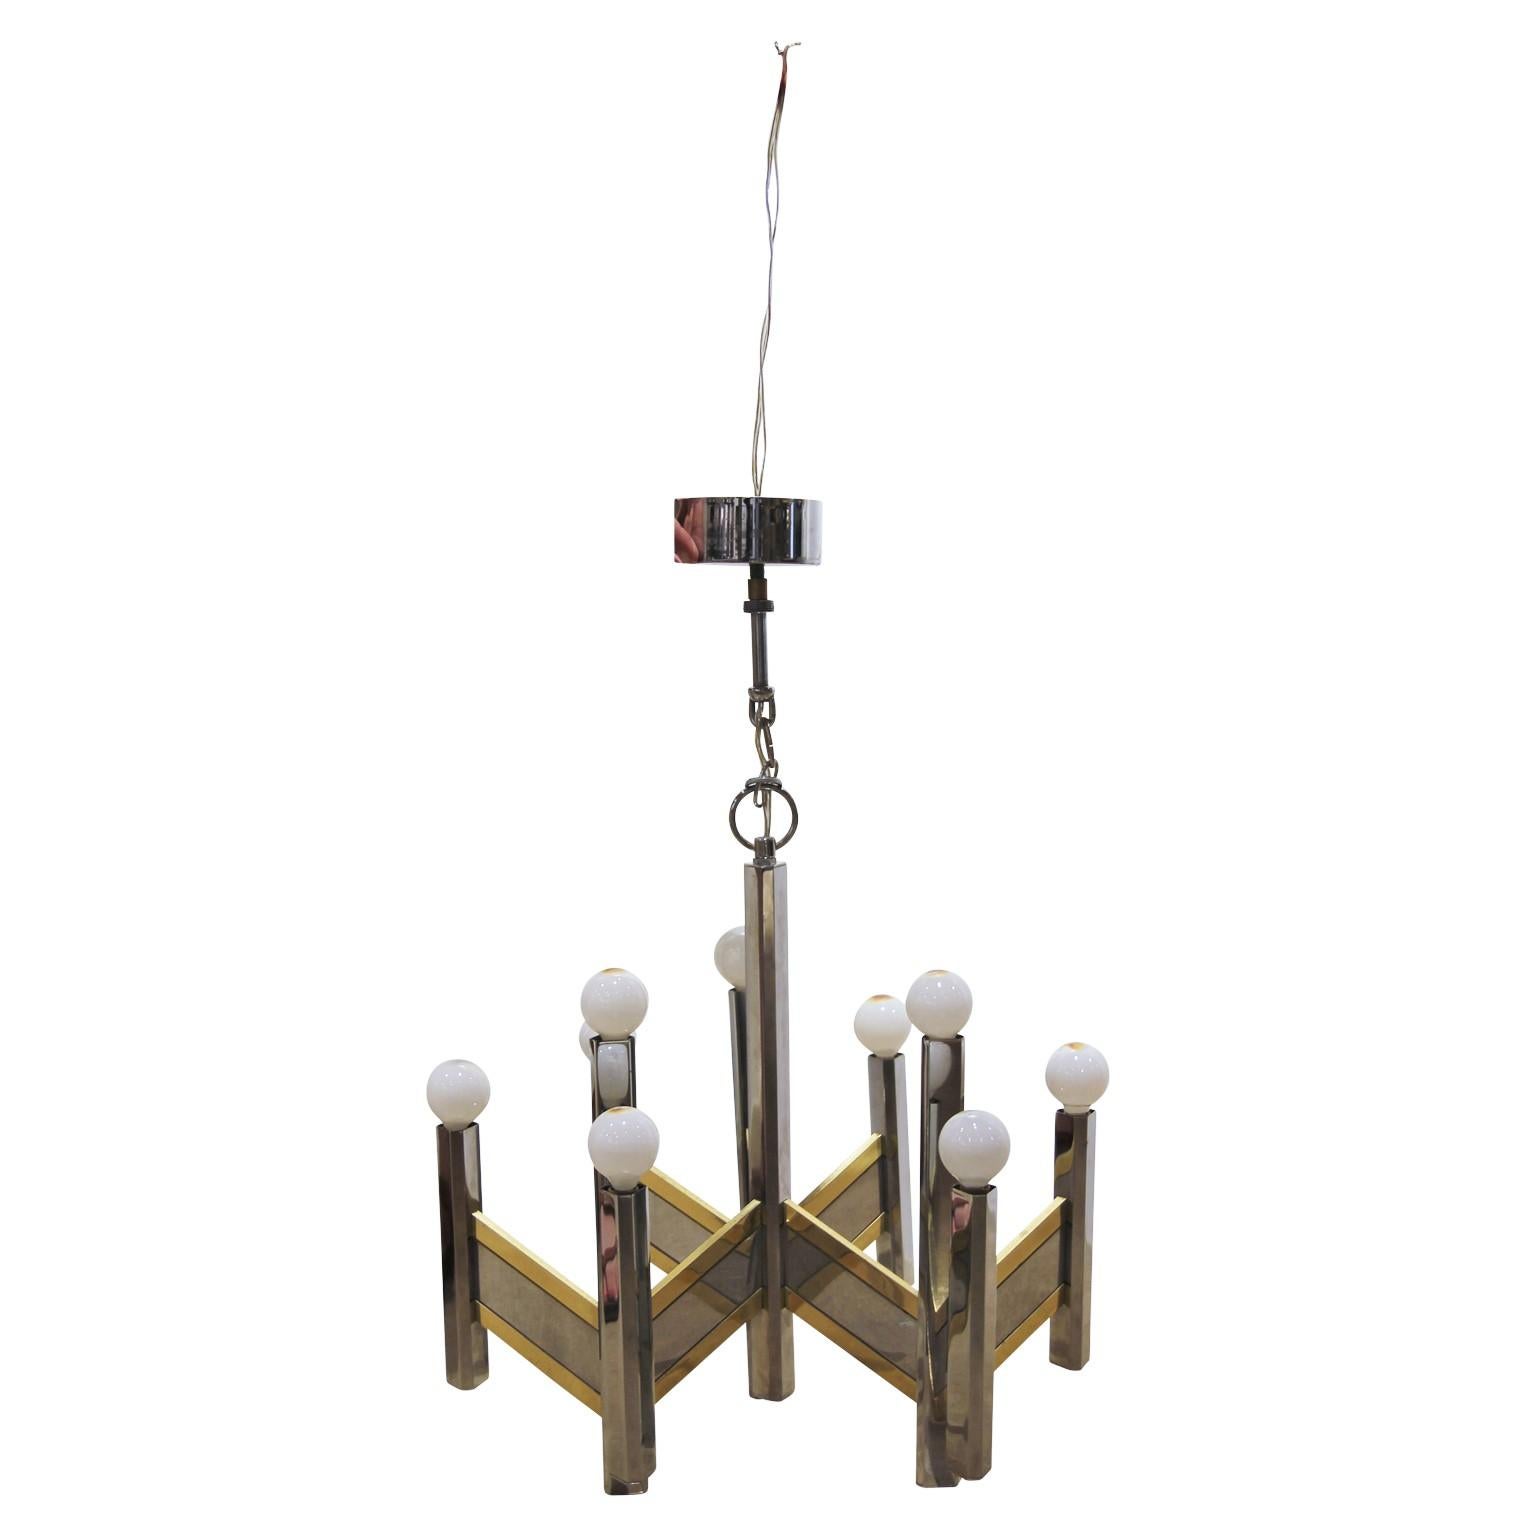 Italian modern chandelier designed by Gaetano Sciolari. The chandelier has fifteen points of lights. It is made of steel and brass. Gaetano Sciolari was an Italian designer known for his Mid-Century Modern lighting fixtures.